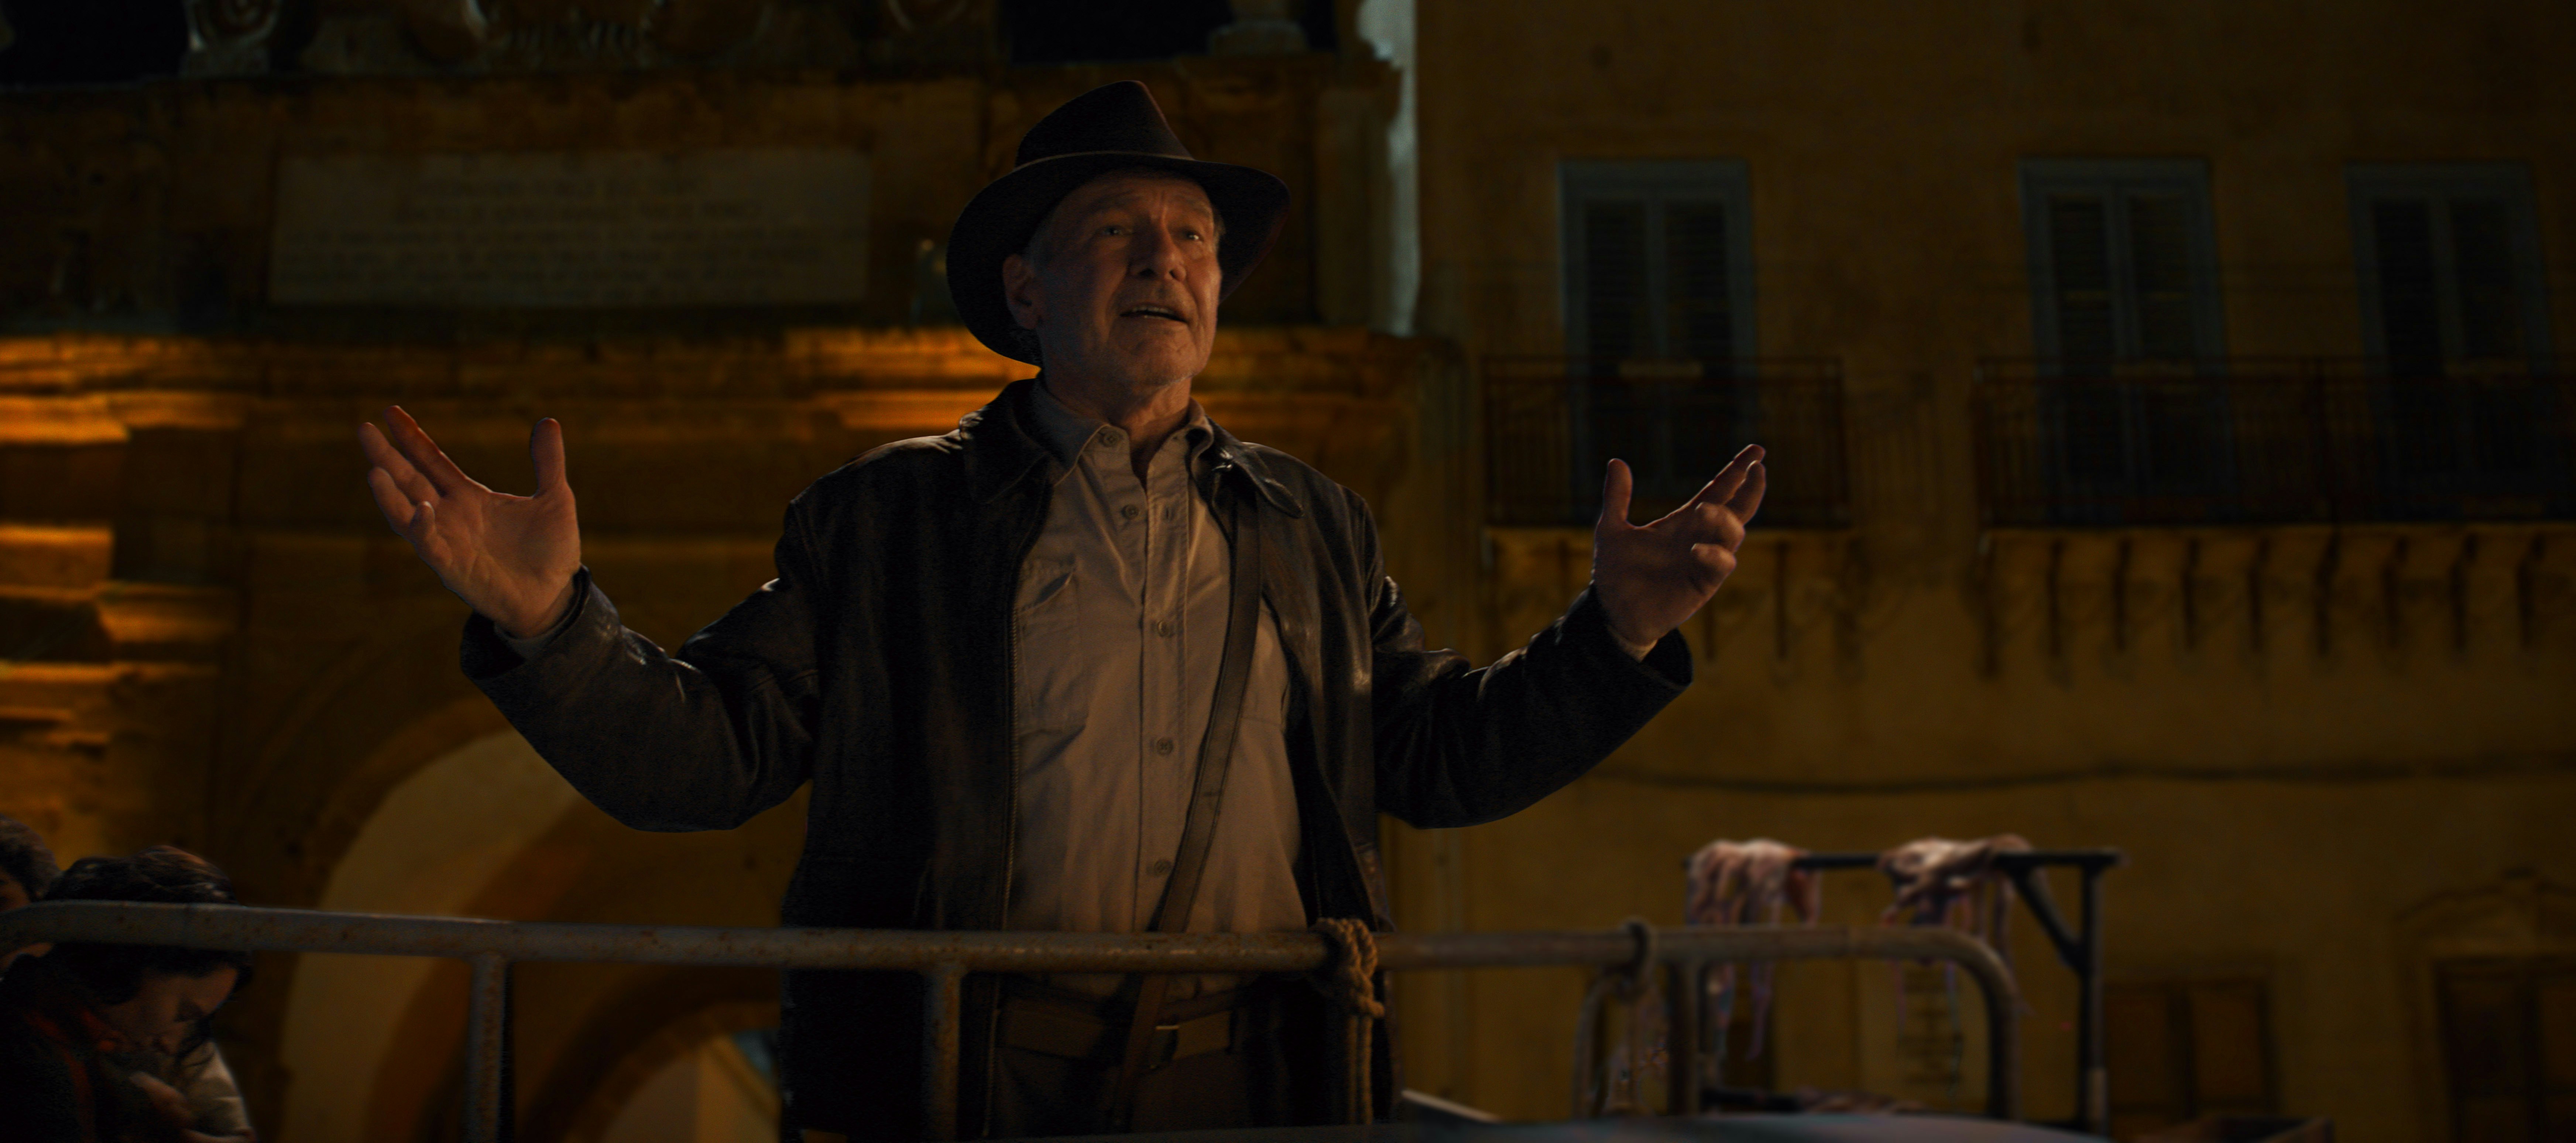 Indiana Jones 5's Satisfying Ending Defies Hollywood's Most Annoying Trend